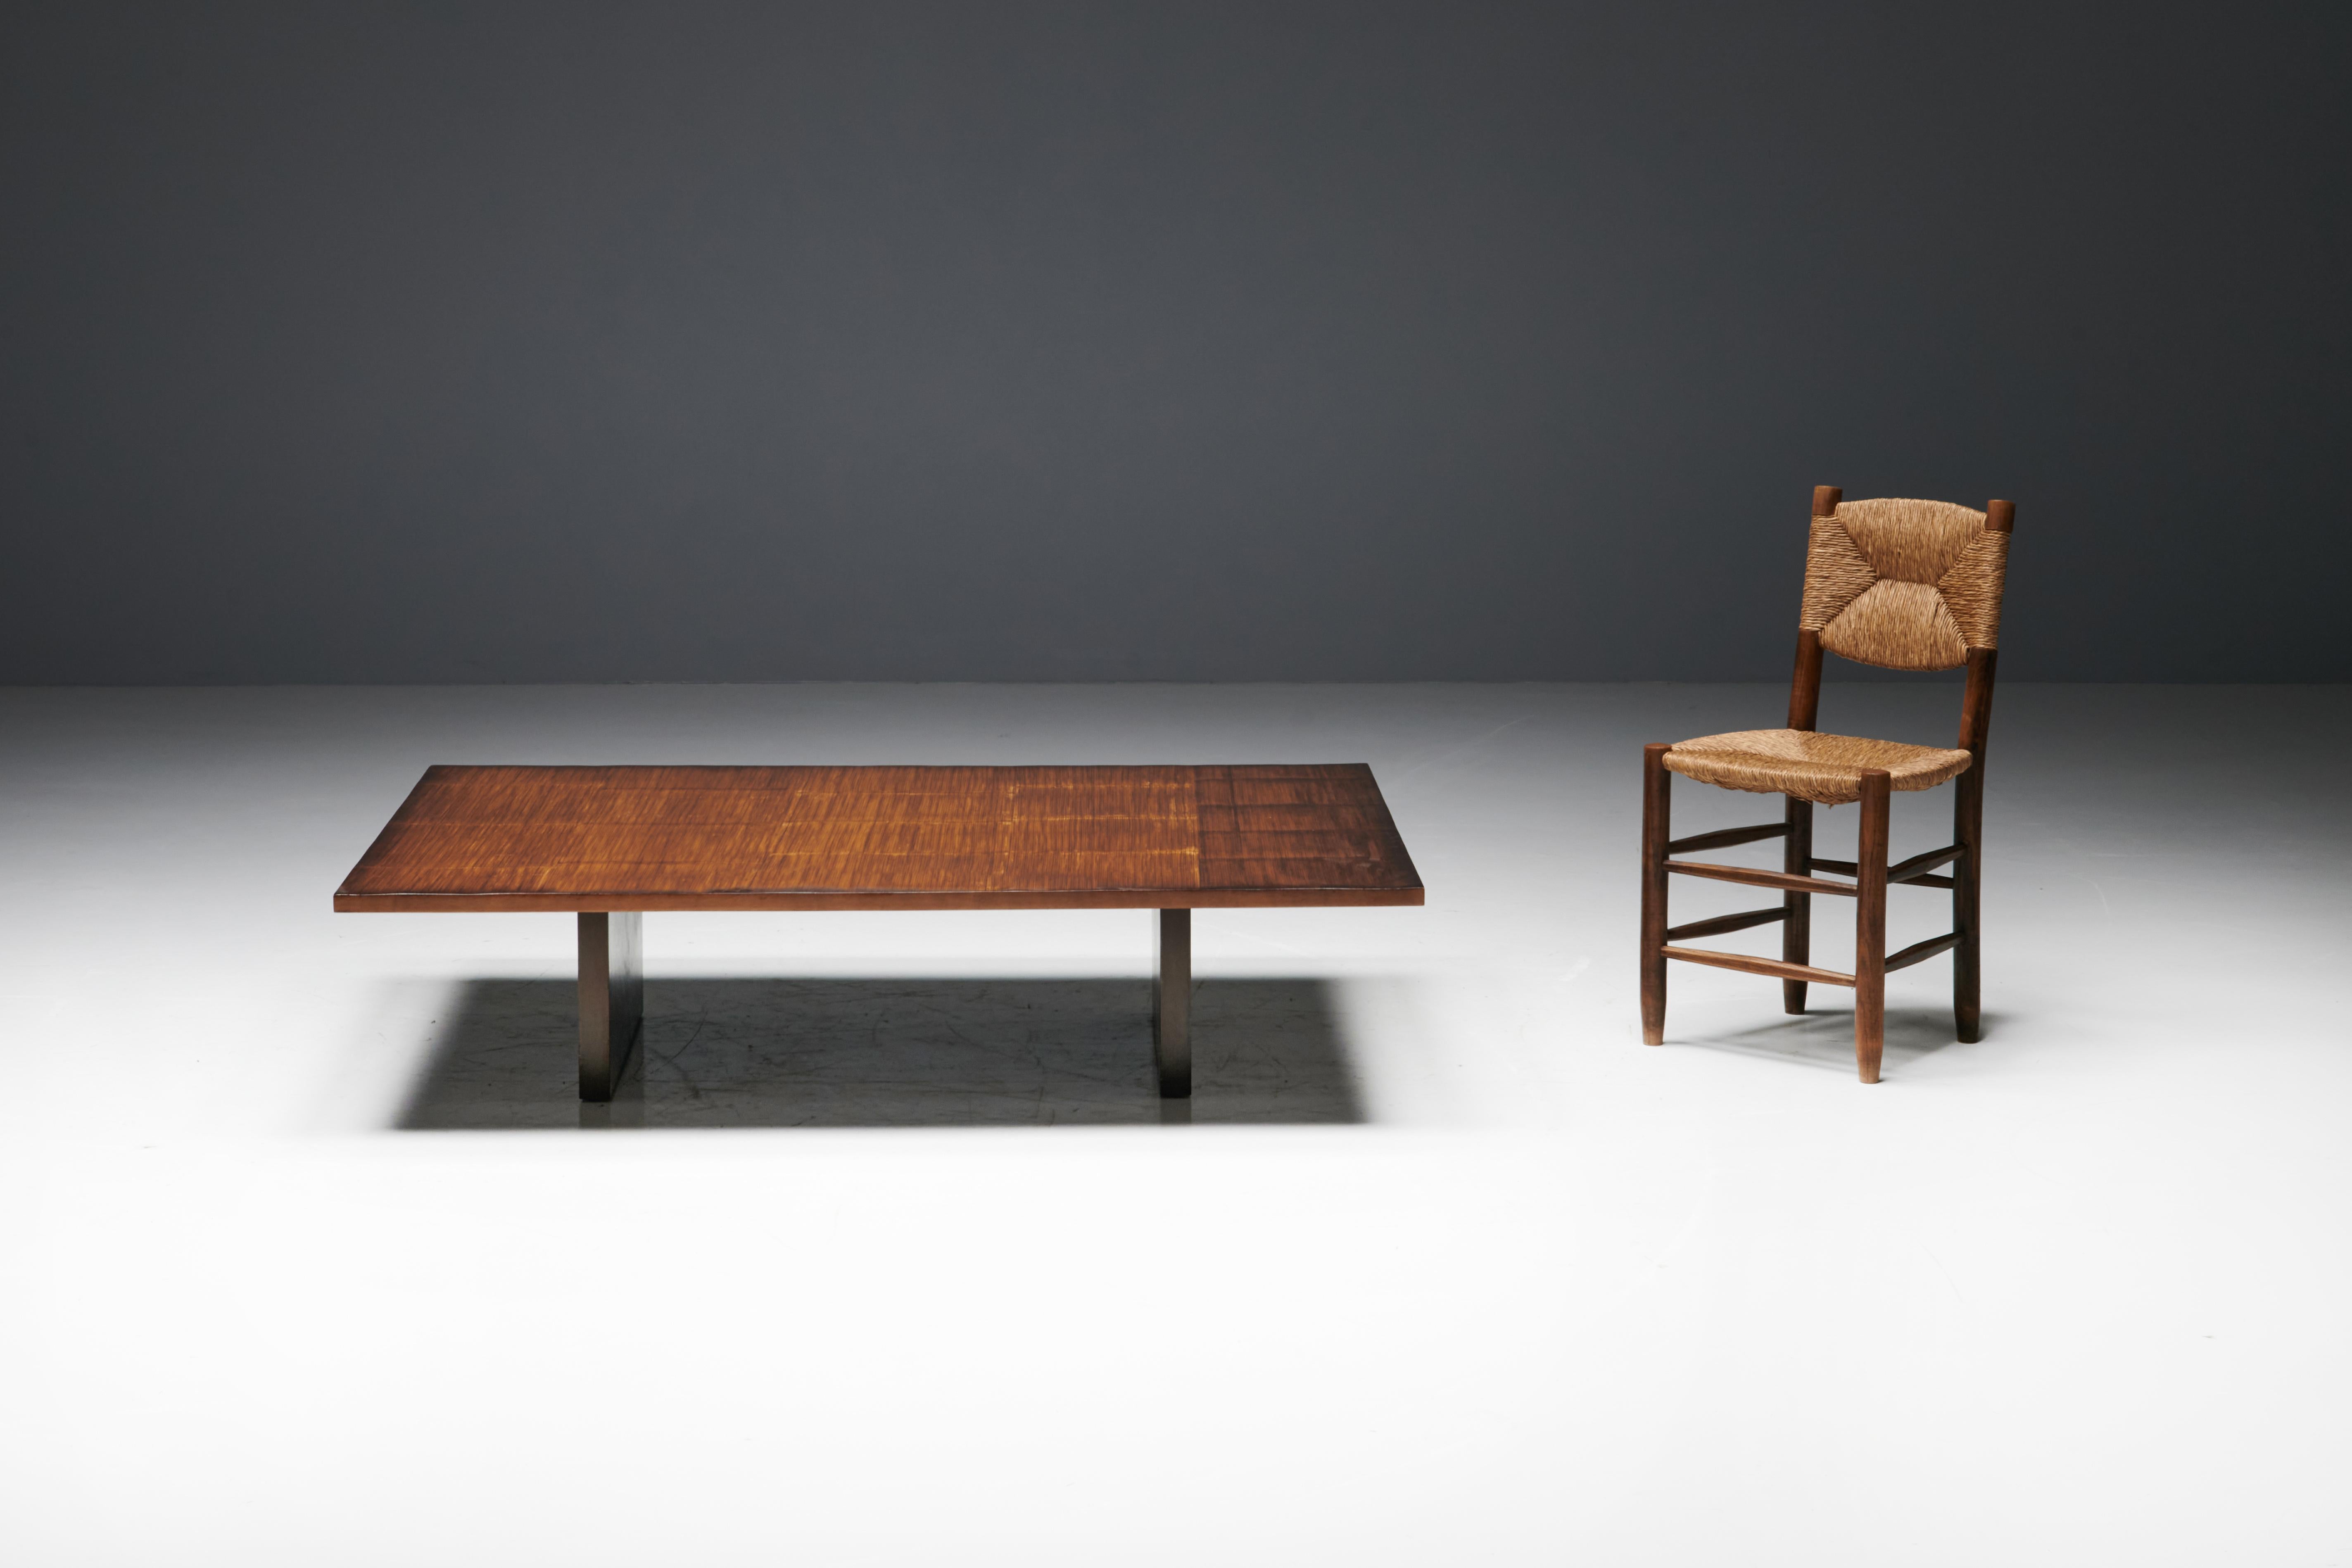 Japonisme Coffee Table by Axel Vervoordt in Wenge and Bamboo, Belgium, 1980s